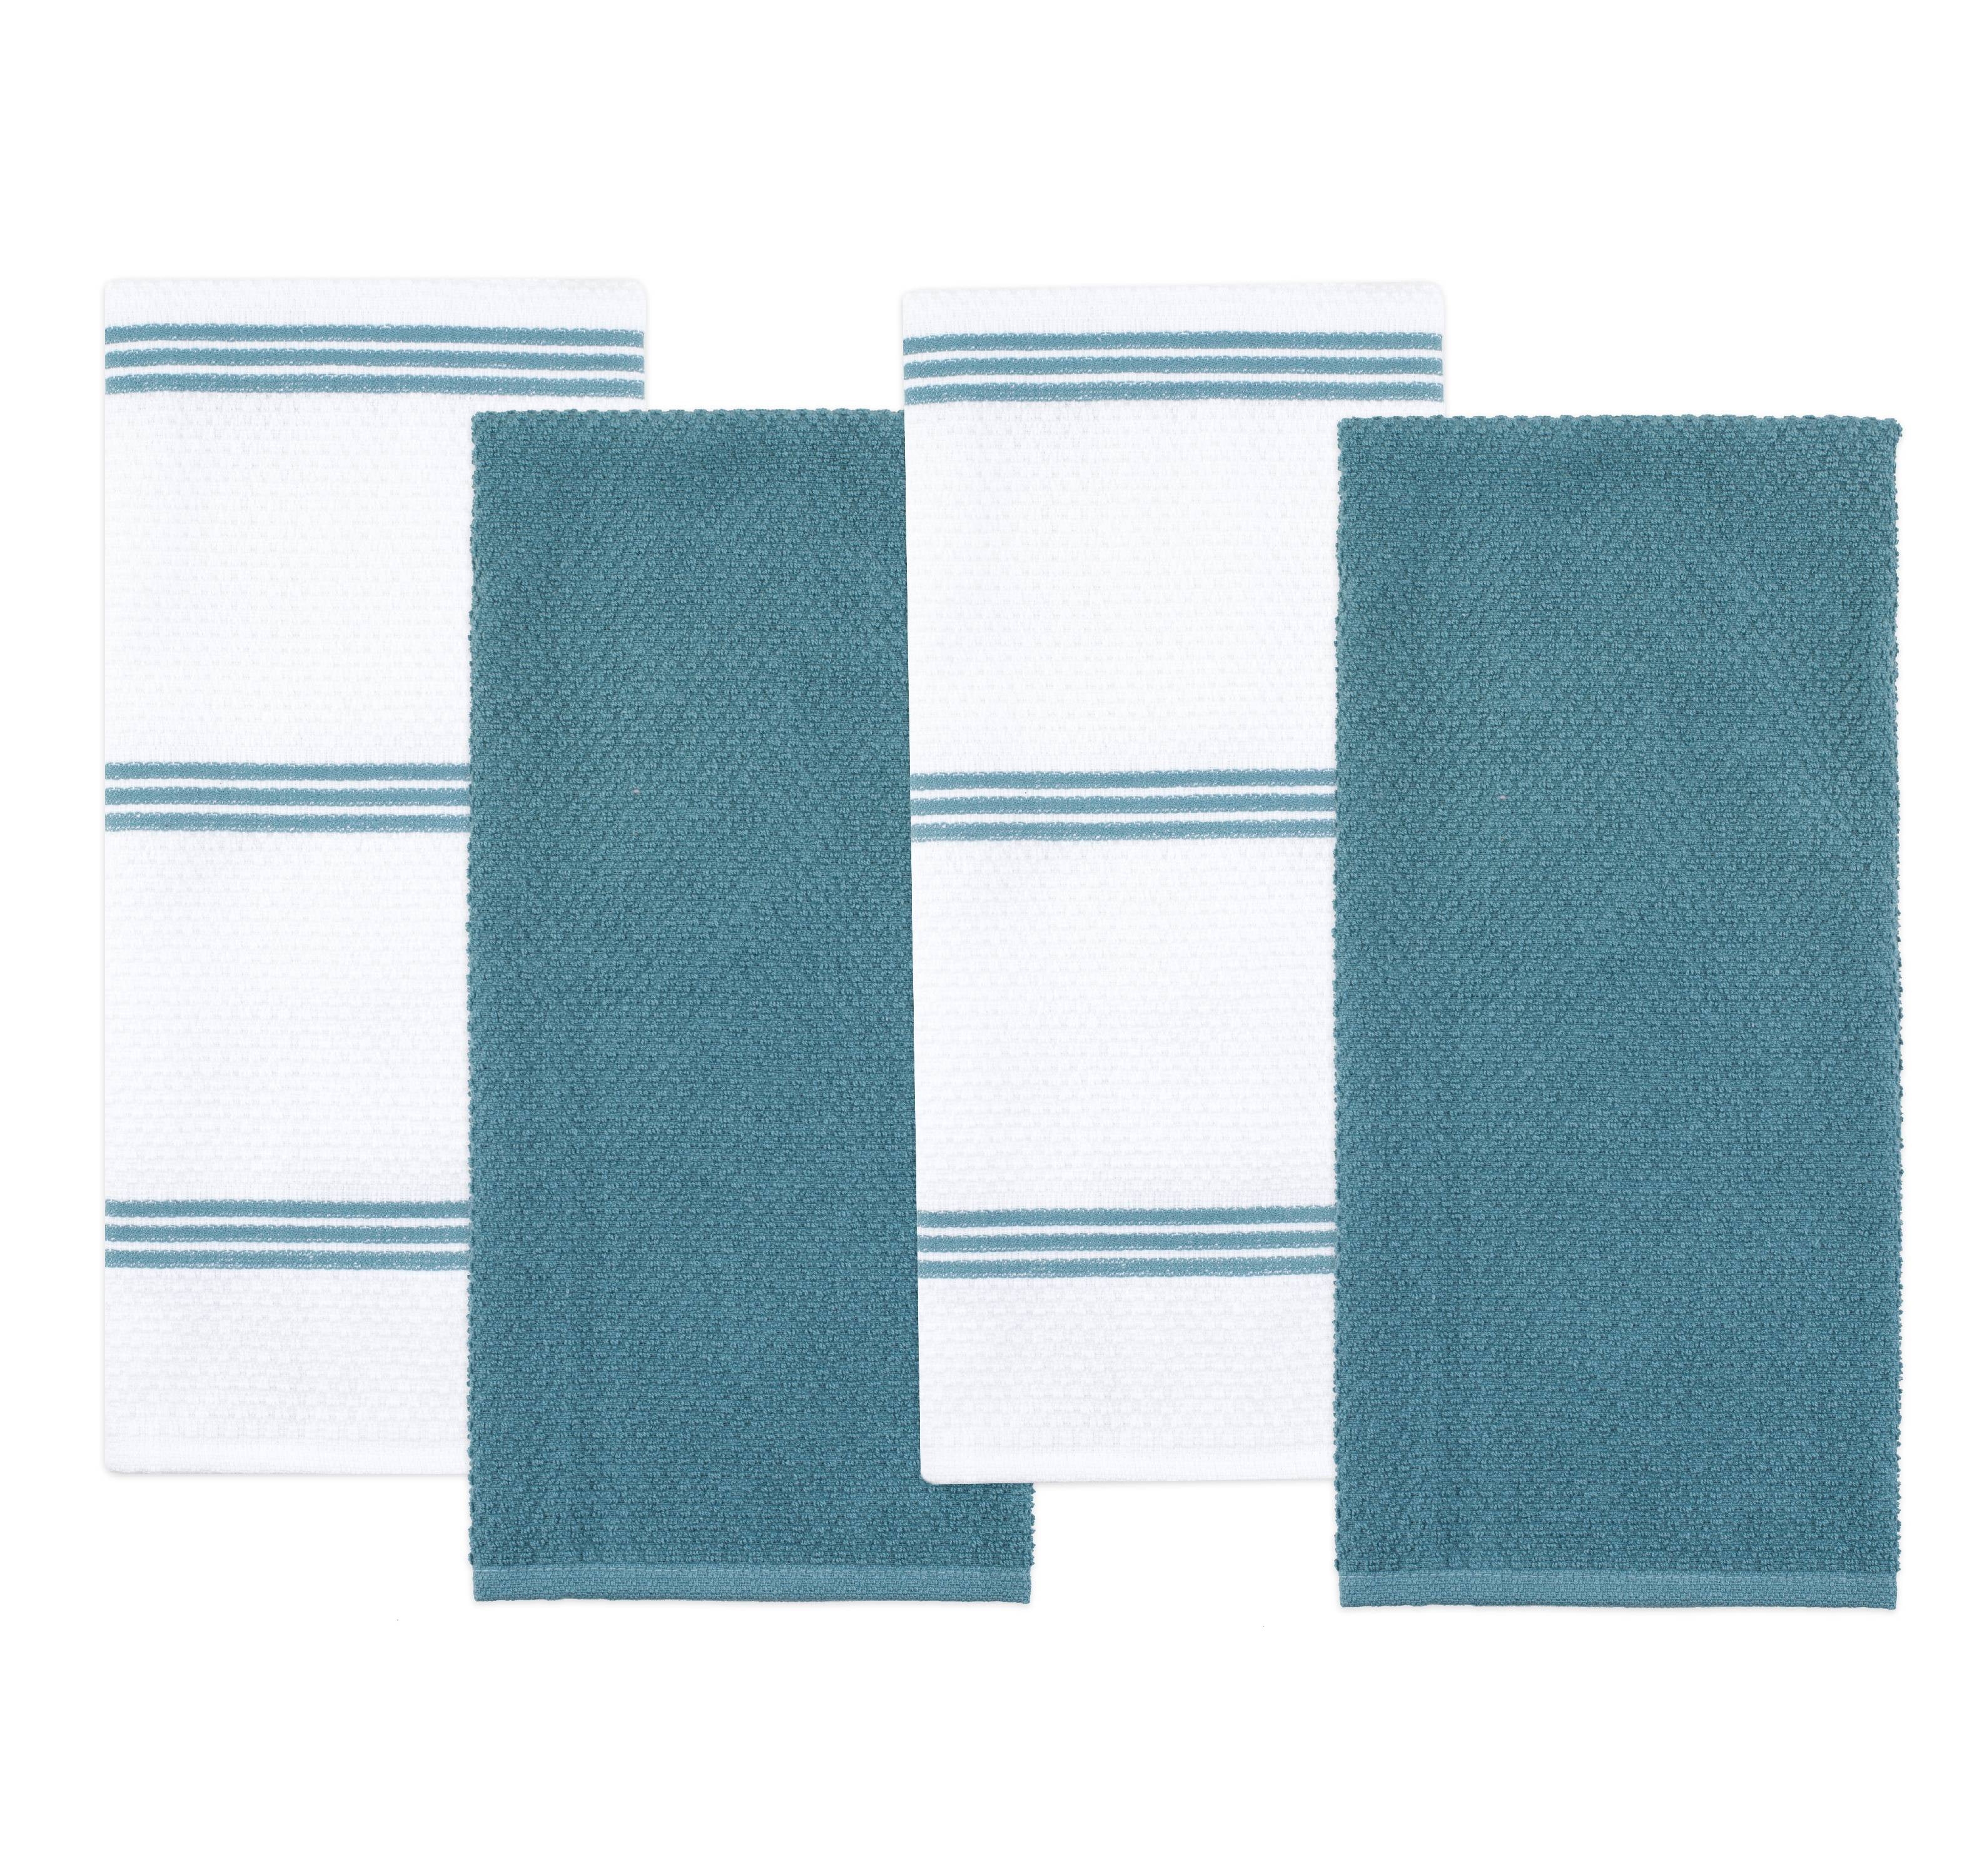 Sticky Toffee Cotton Waffle Weave Kitchen Towels, Blue, 3 Pack, 28 in x 16 in